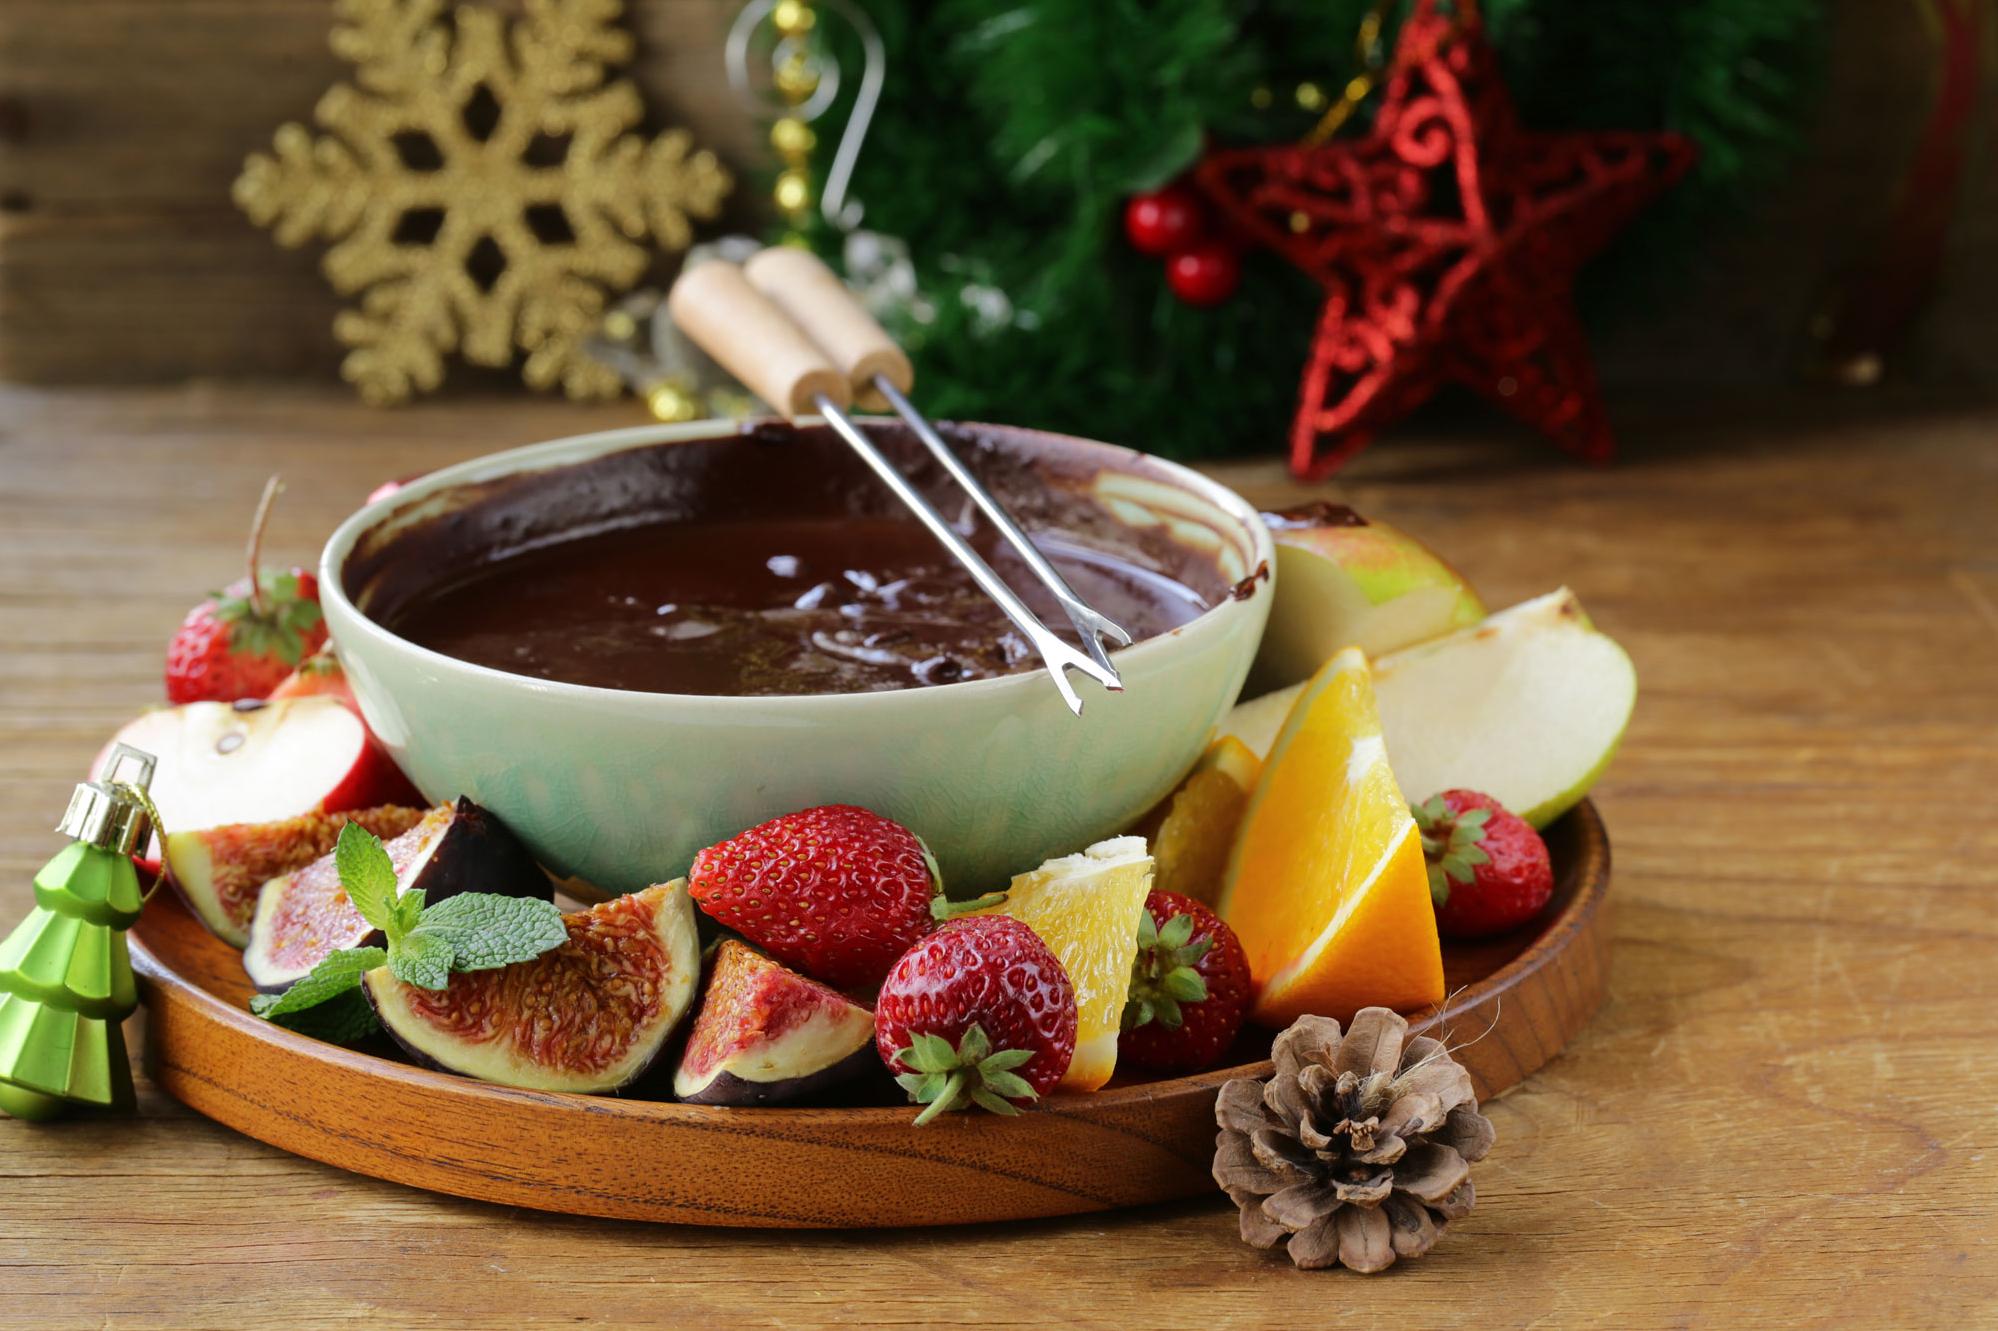  This fondue is a melting pot of flavors.